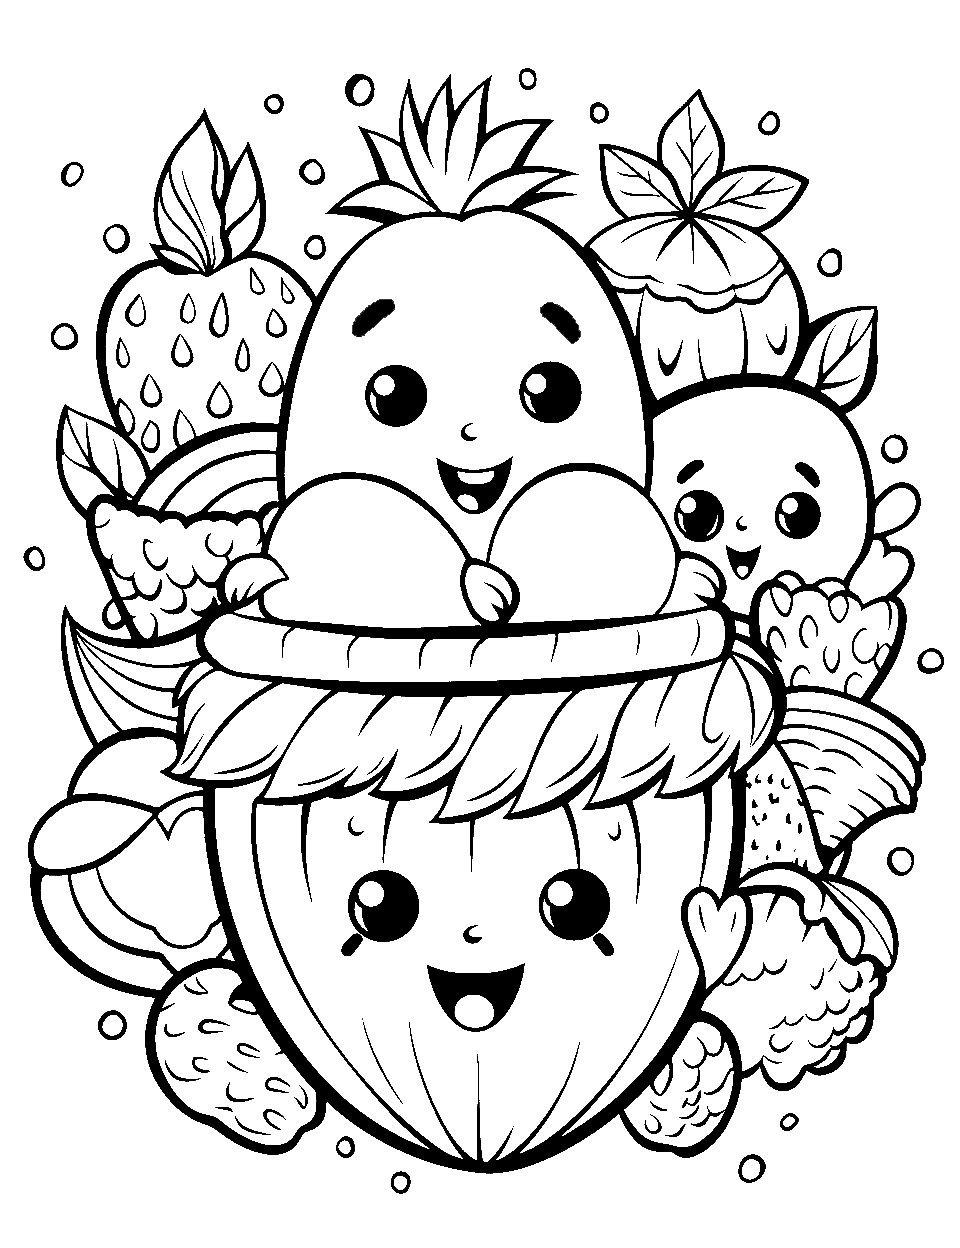 Fruit Fiesta Fun Coloring Page - Fruit Shopkins clumped together, ready to be showcased in a shop.